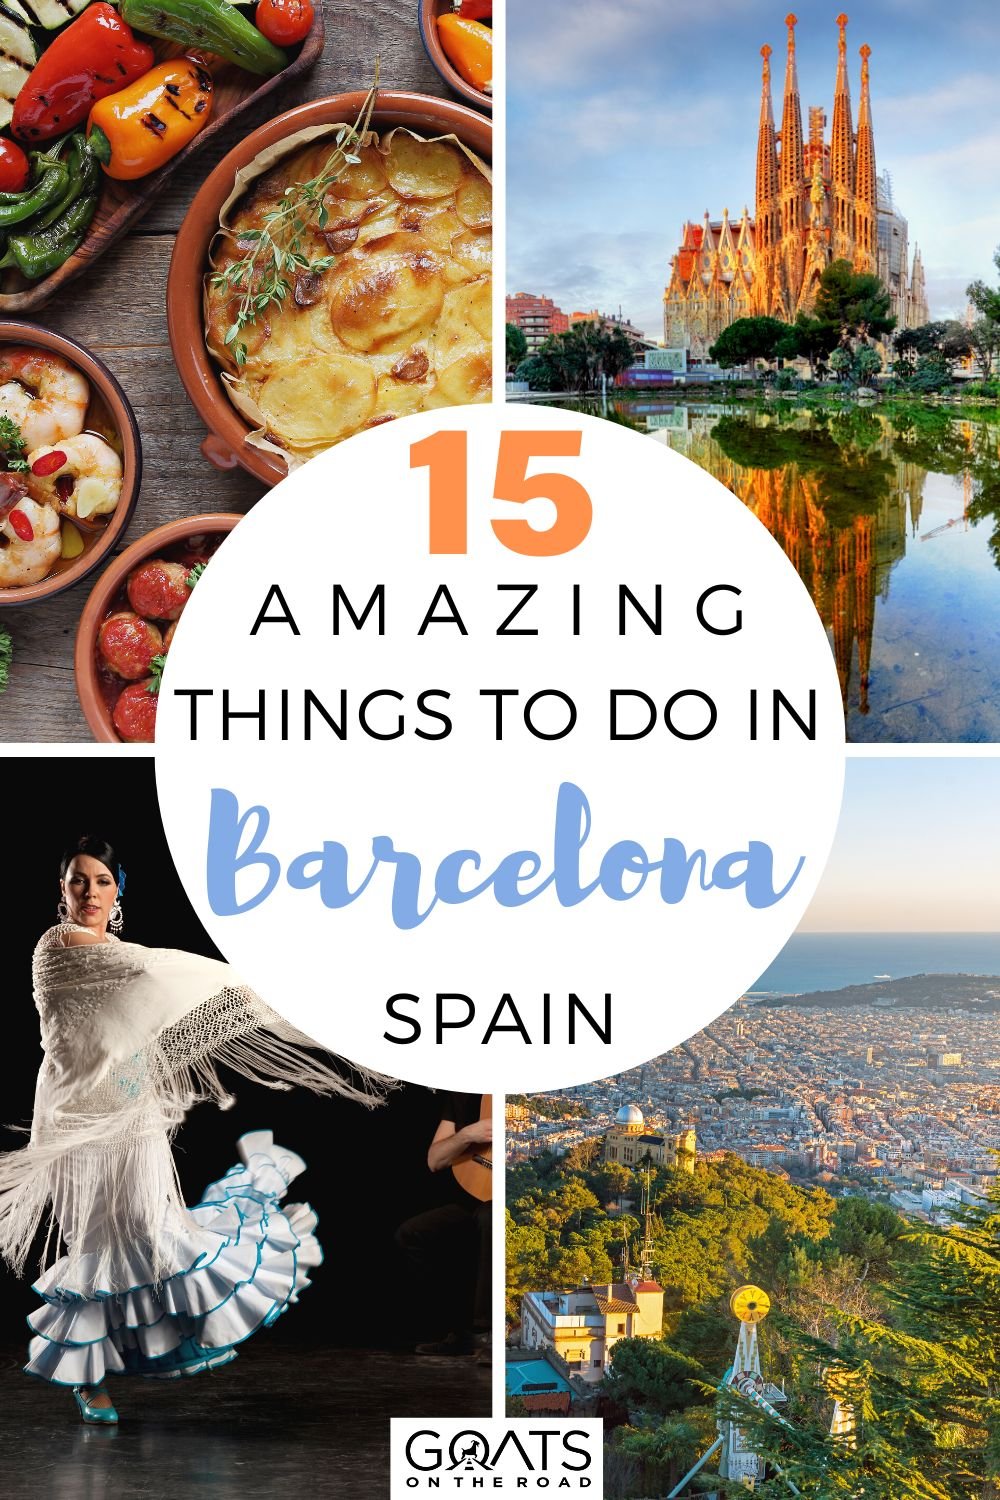 15 Amazing Things To Do in Barcelona, Spain